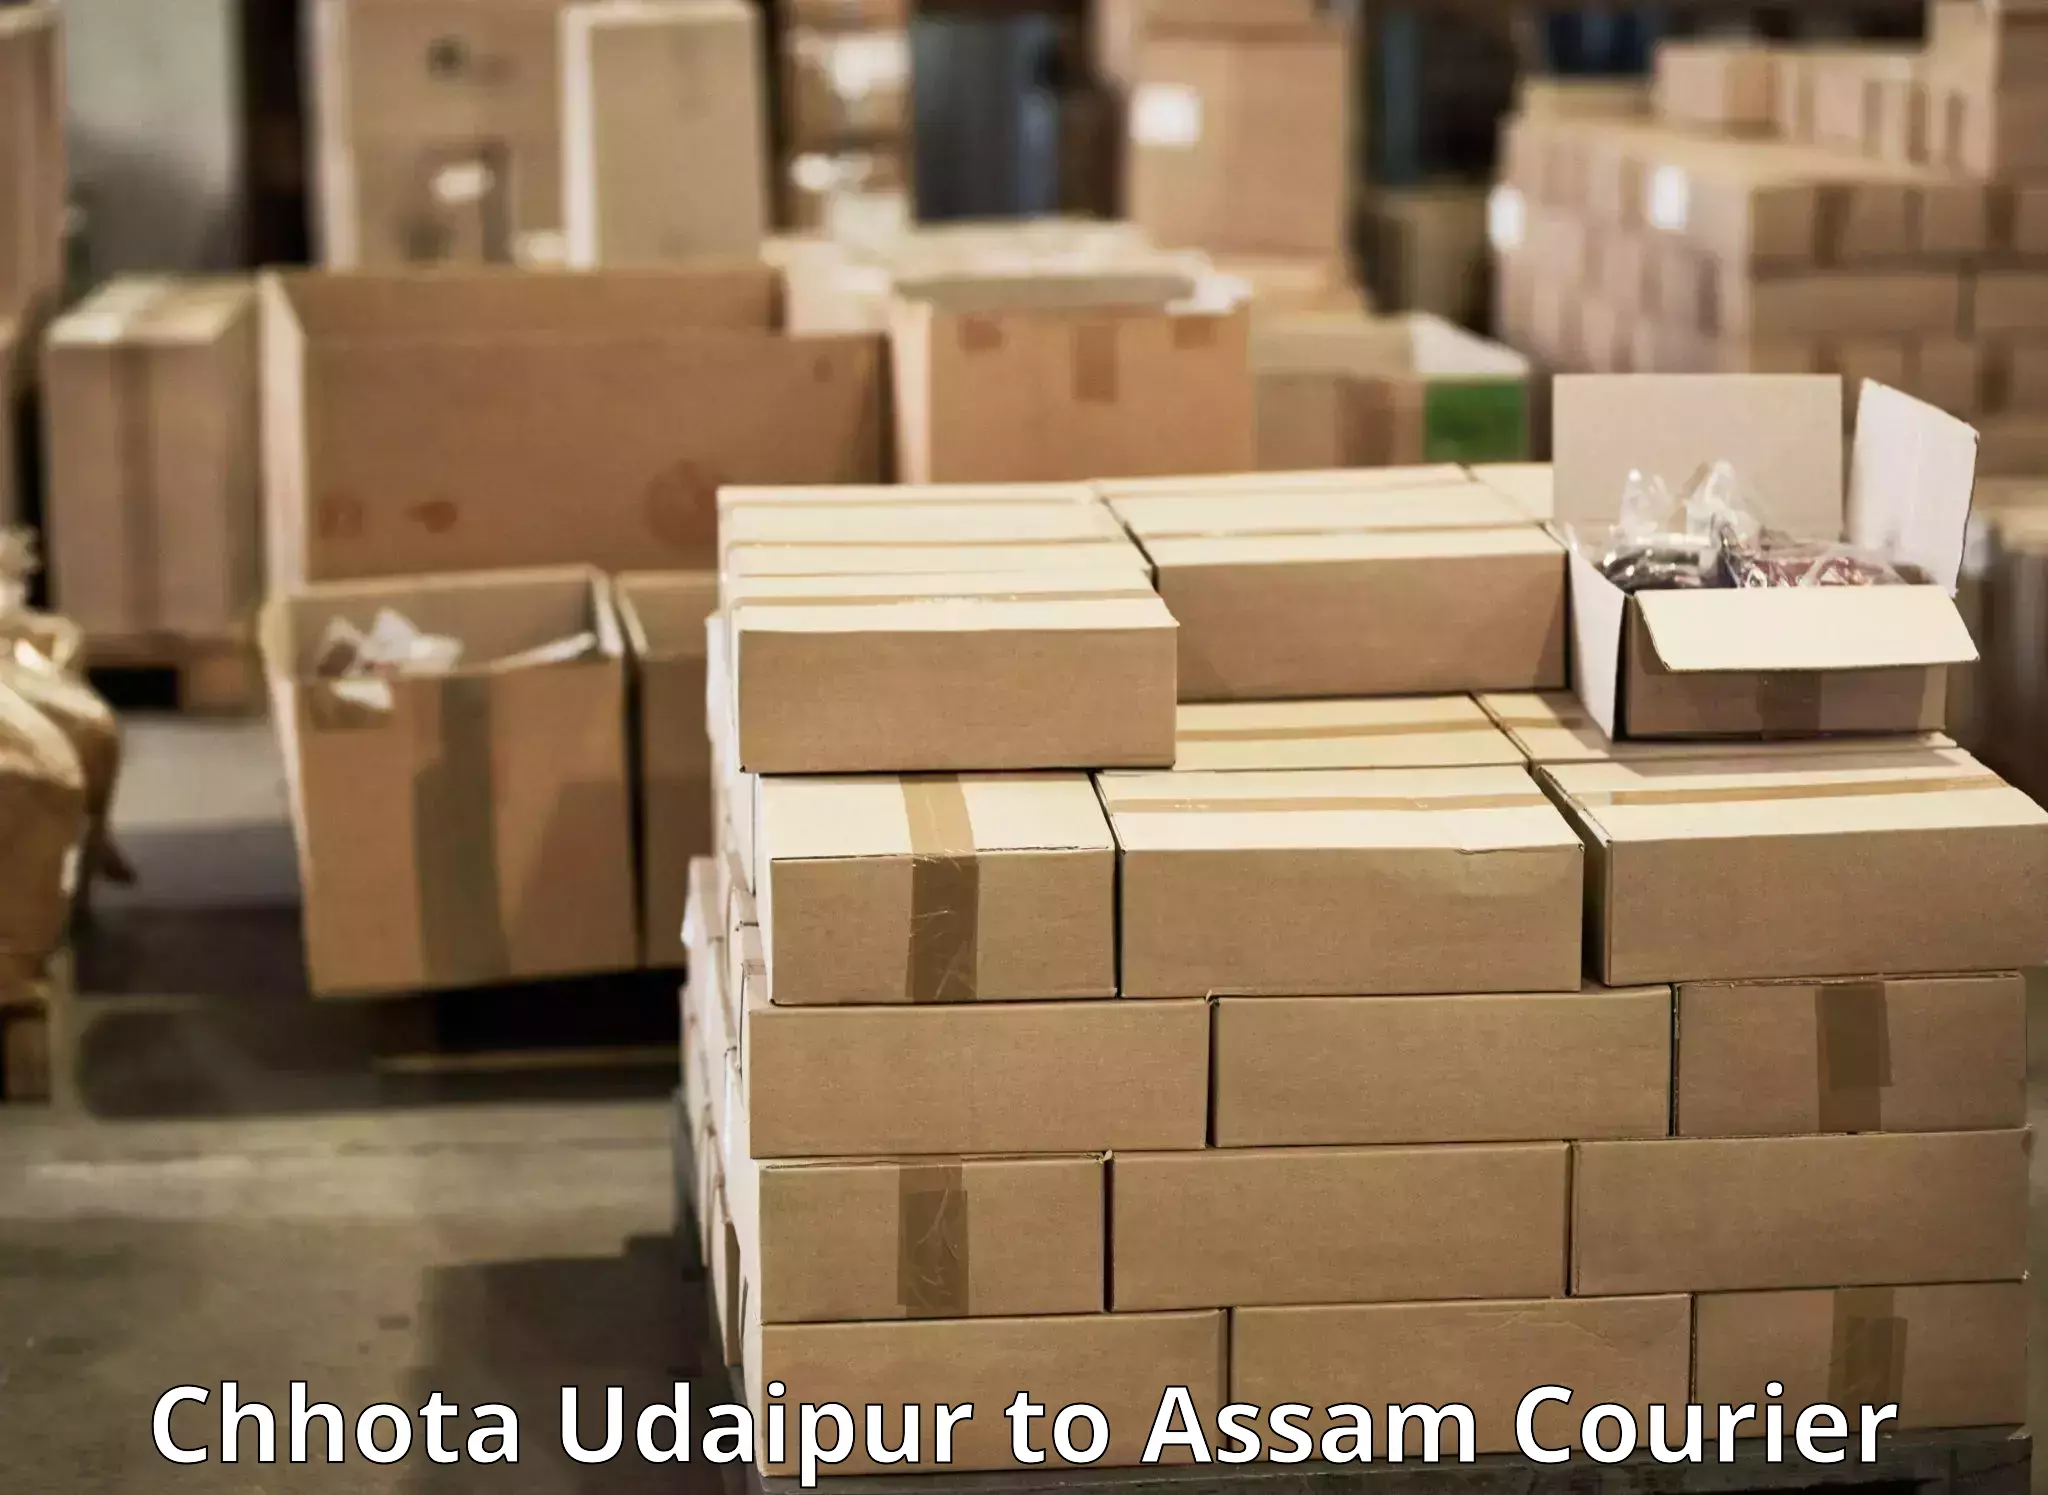 Reliable courier services Chhota Udaipur to Guwahati